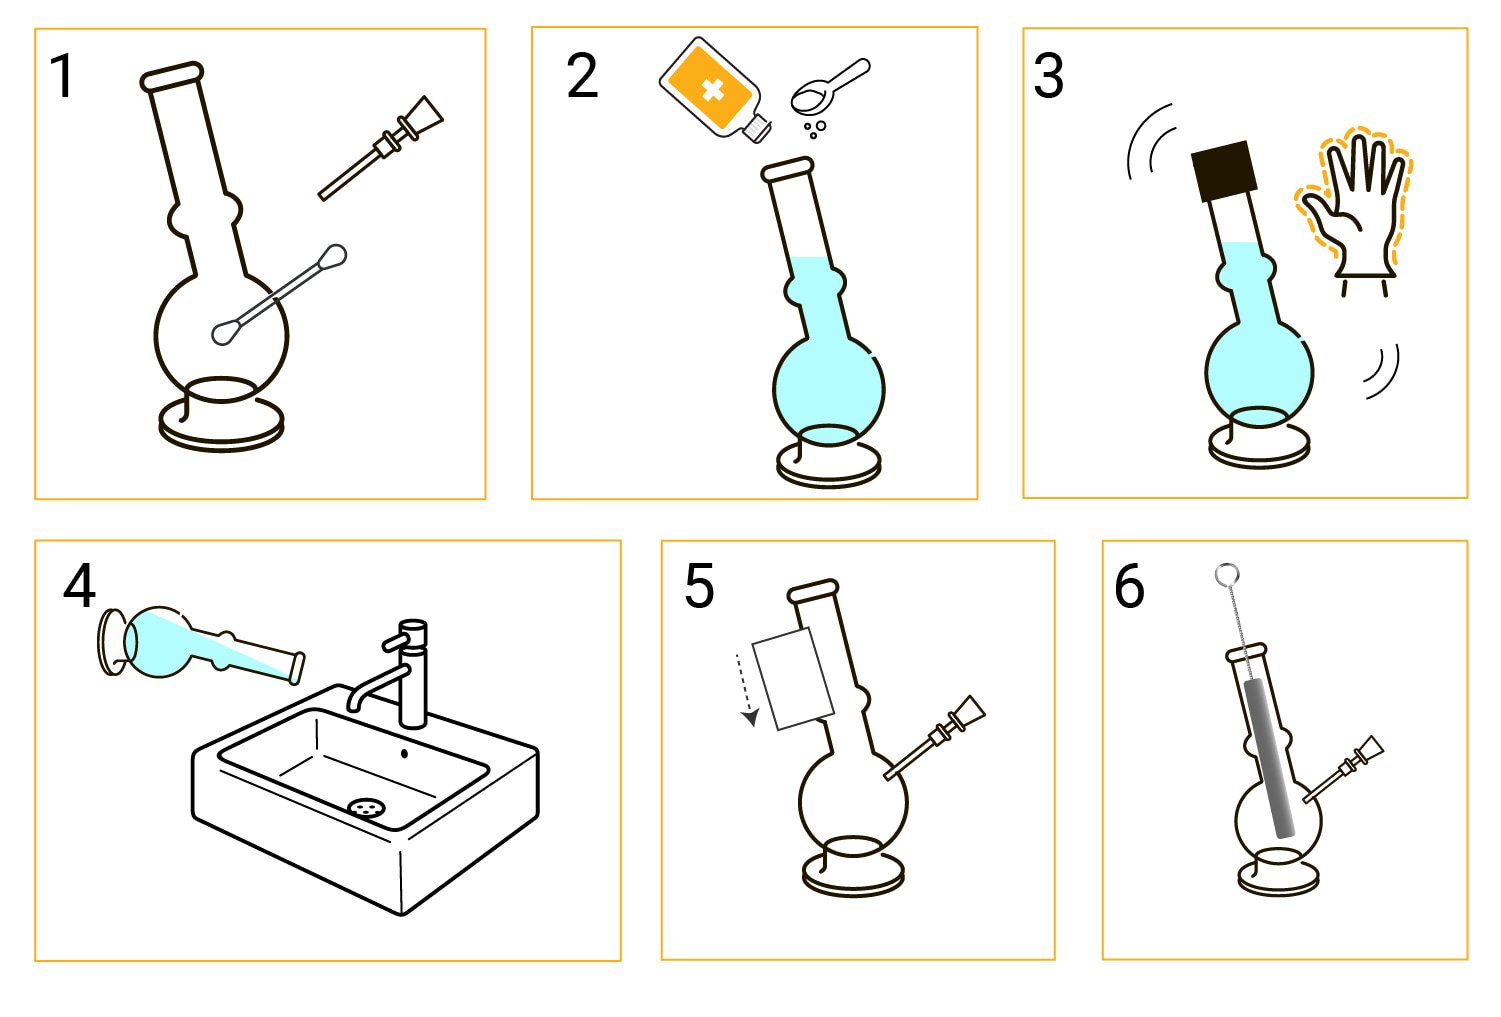 How to Clean Your Bong, Bowl or Pipe